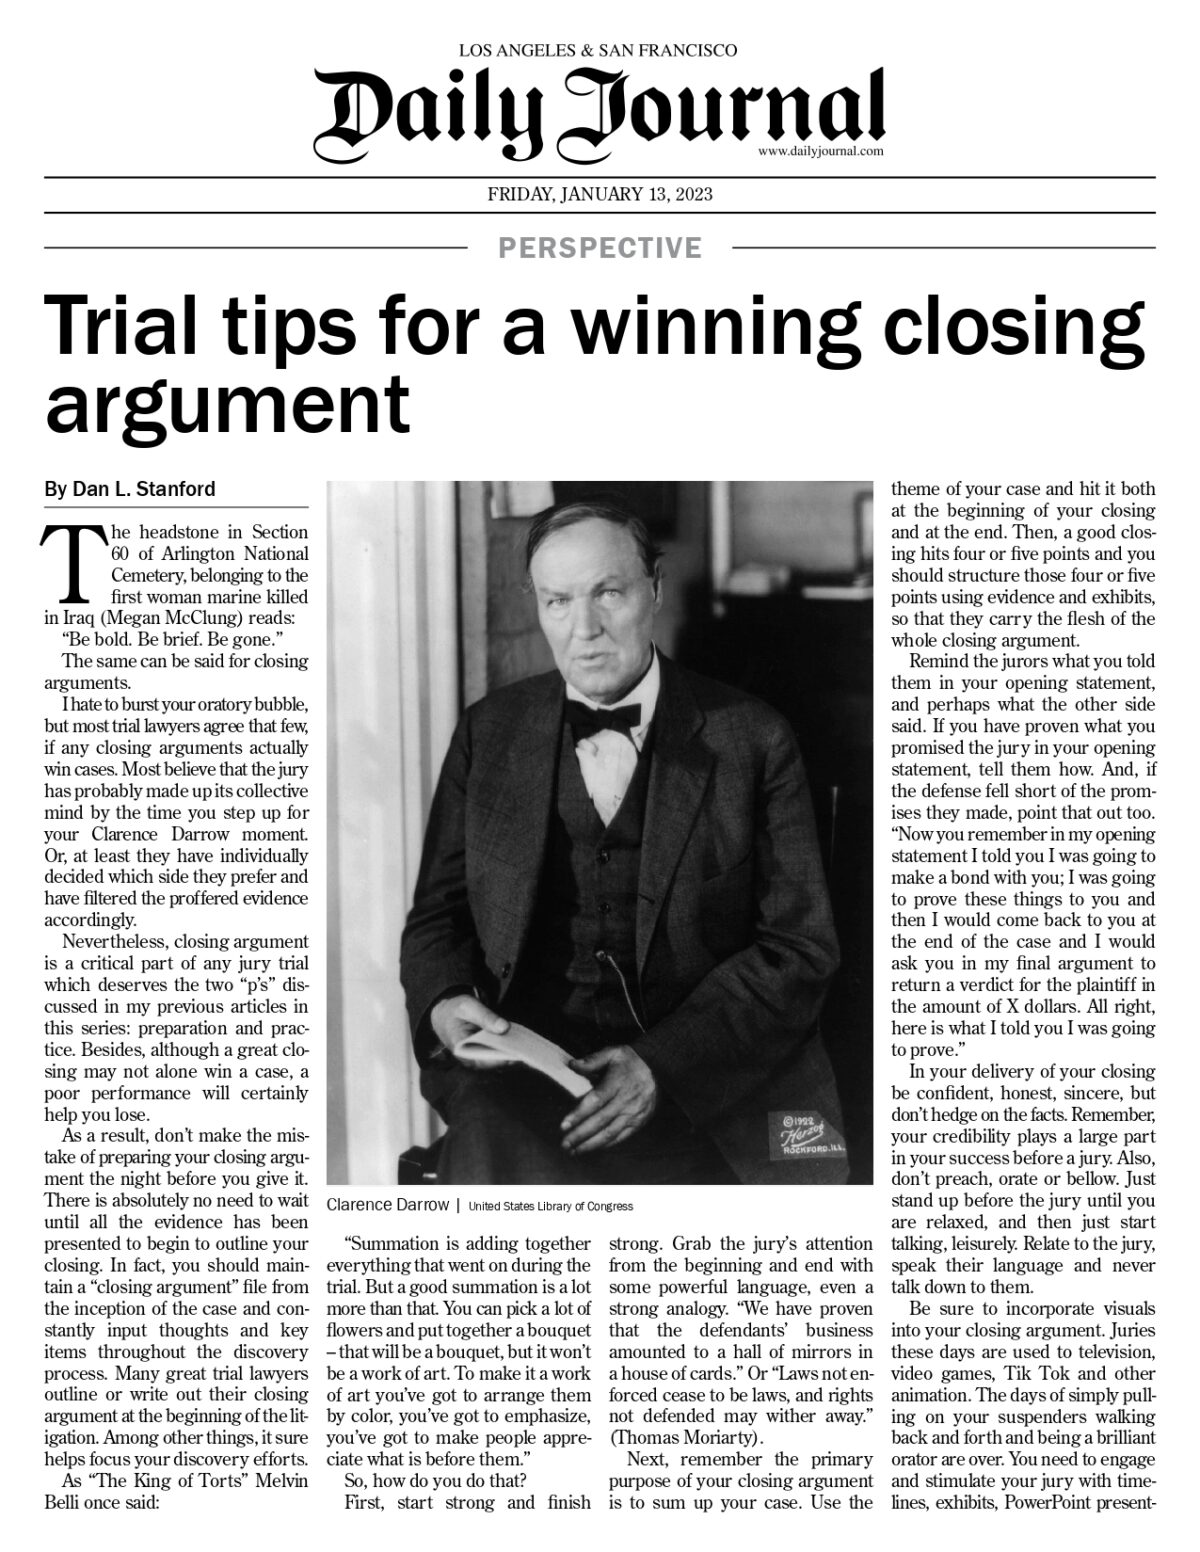 Trial tips for a winning closing argument